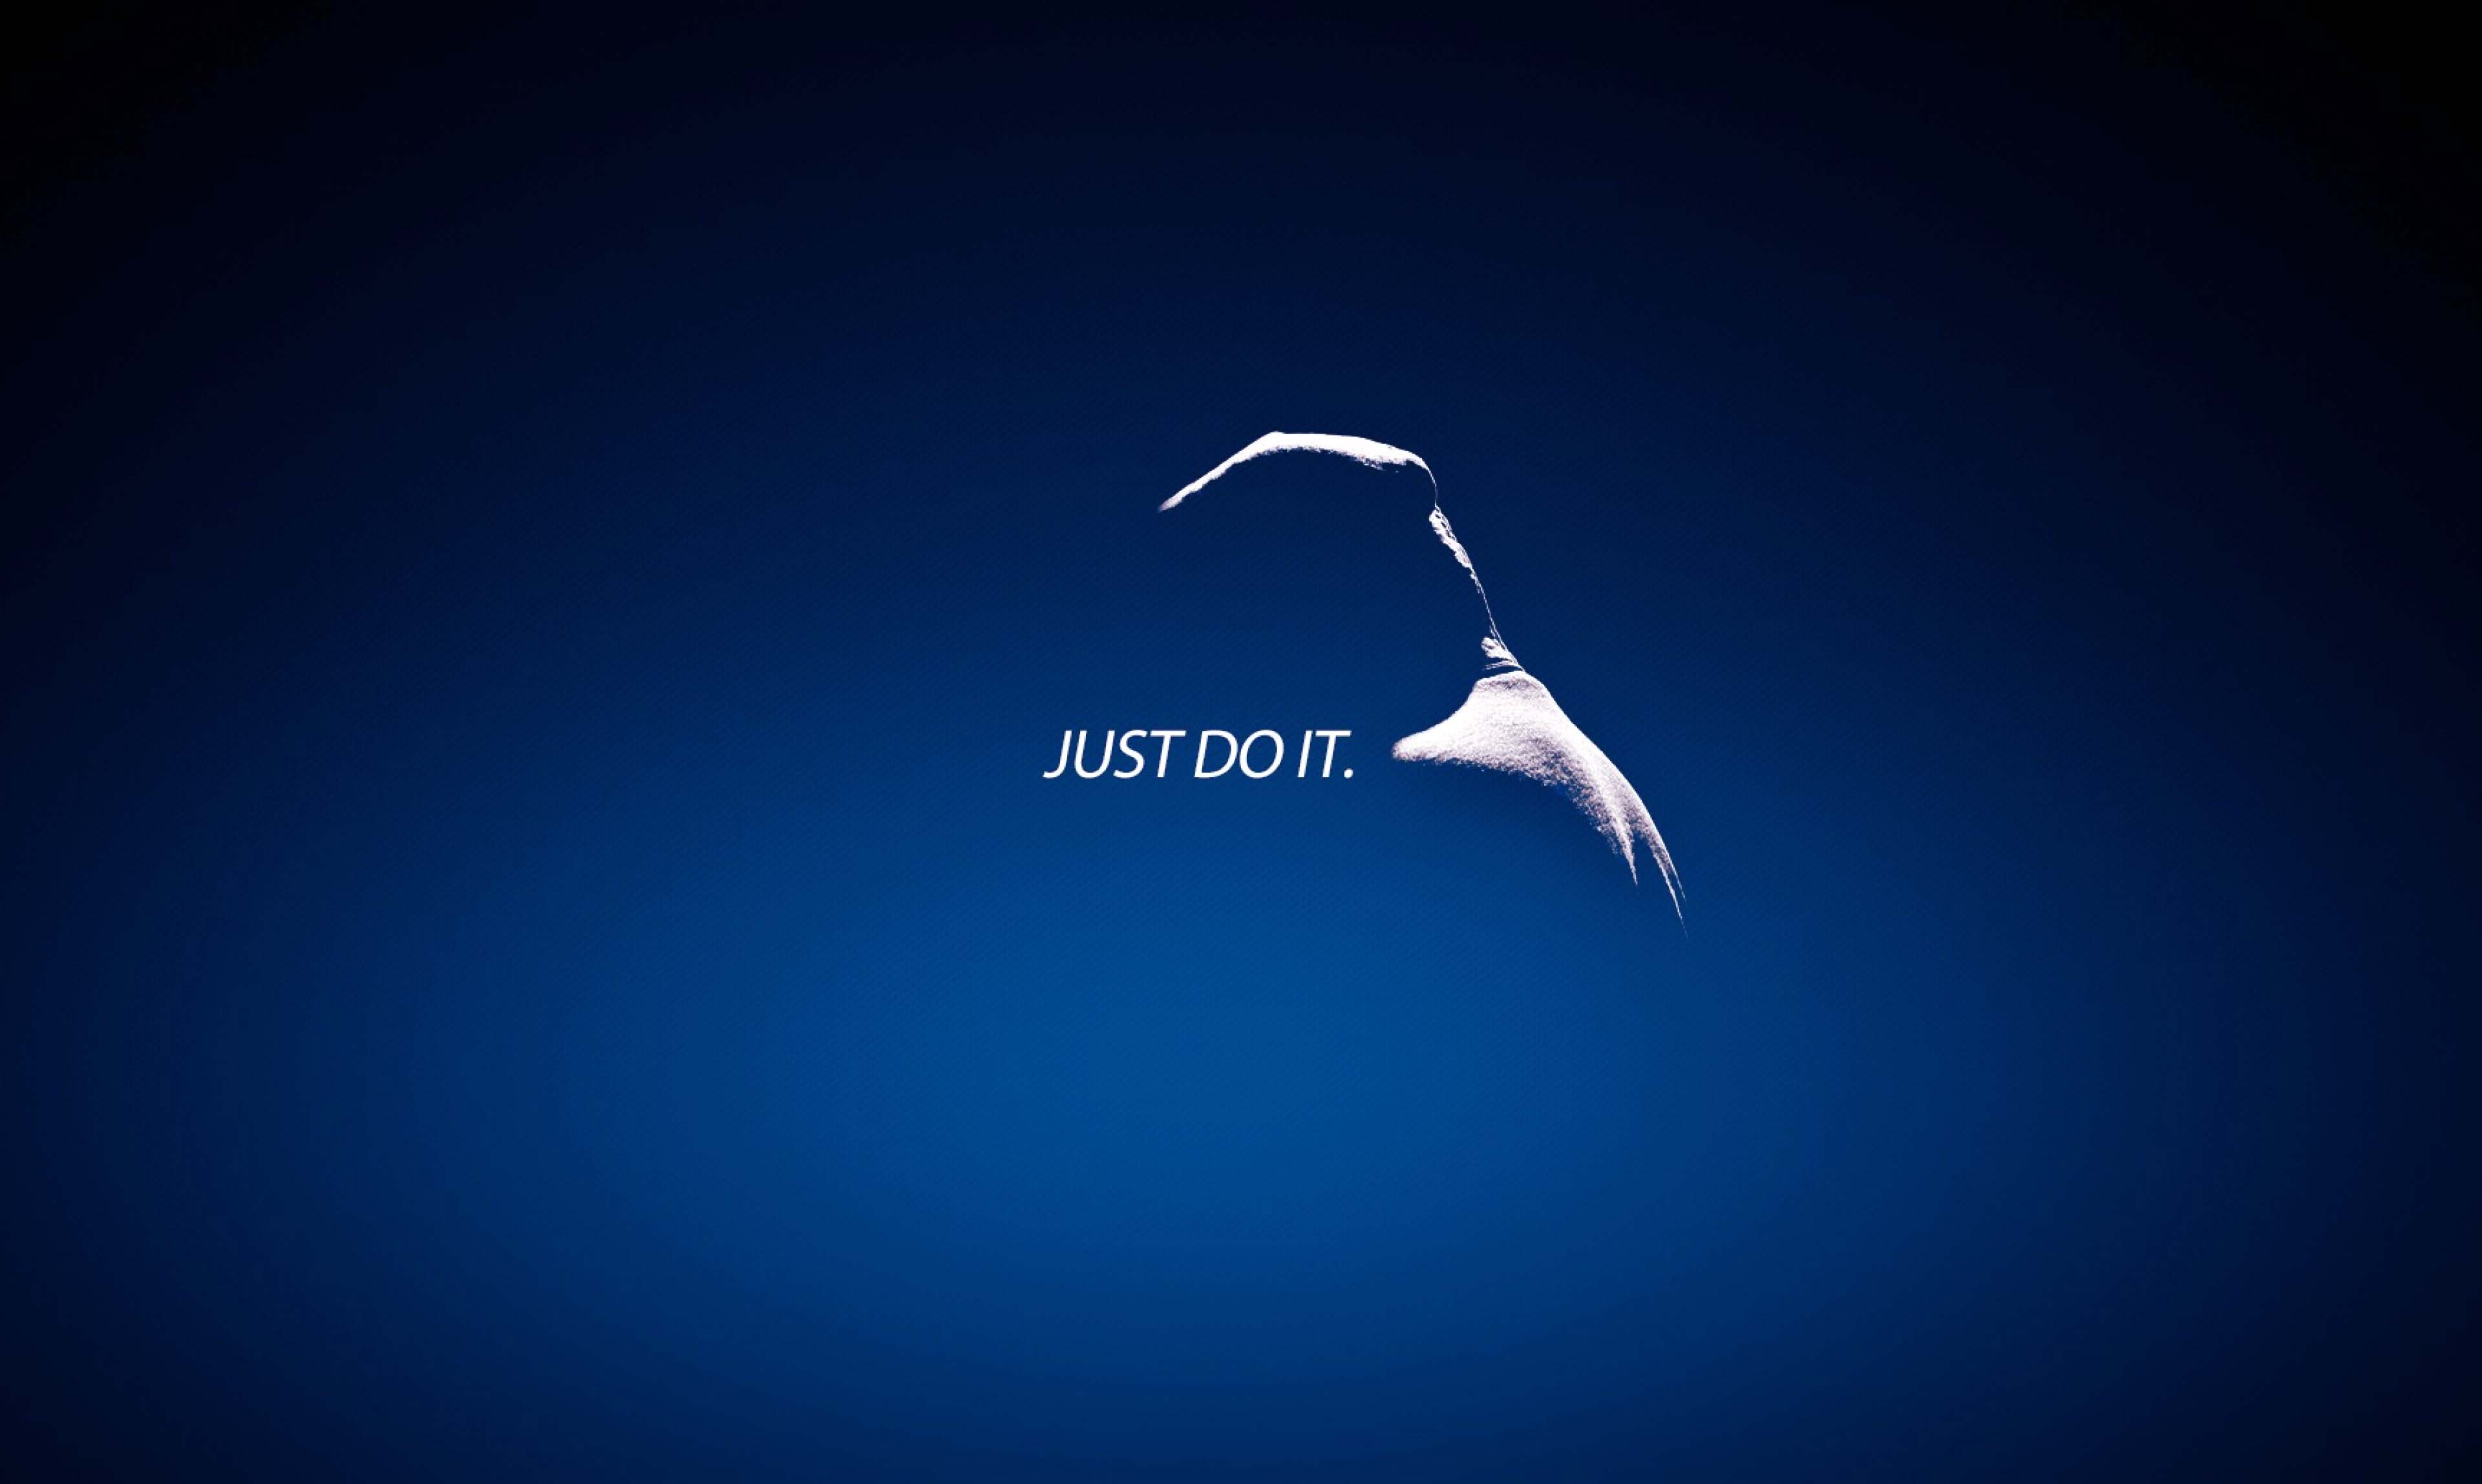 Nike Wallpaper Quot Just Do It Most Popular HD Image